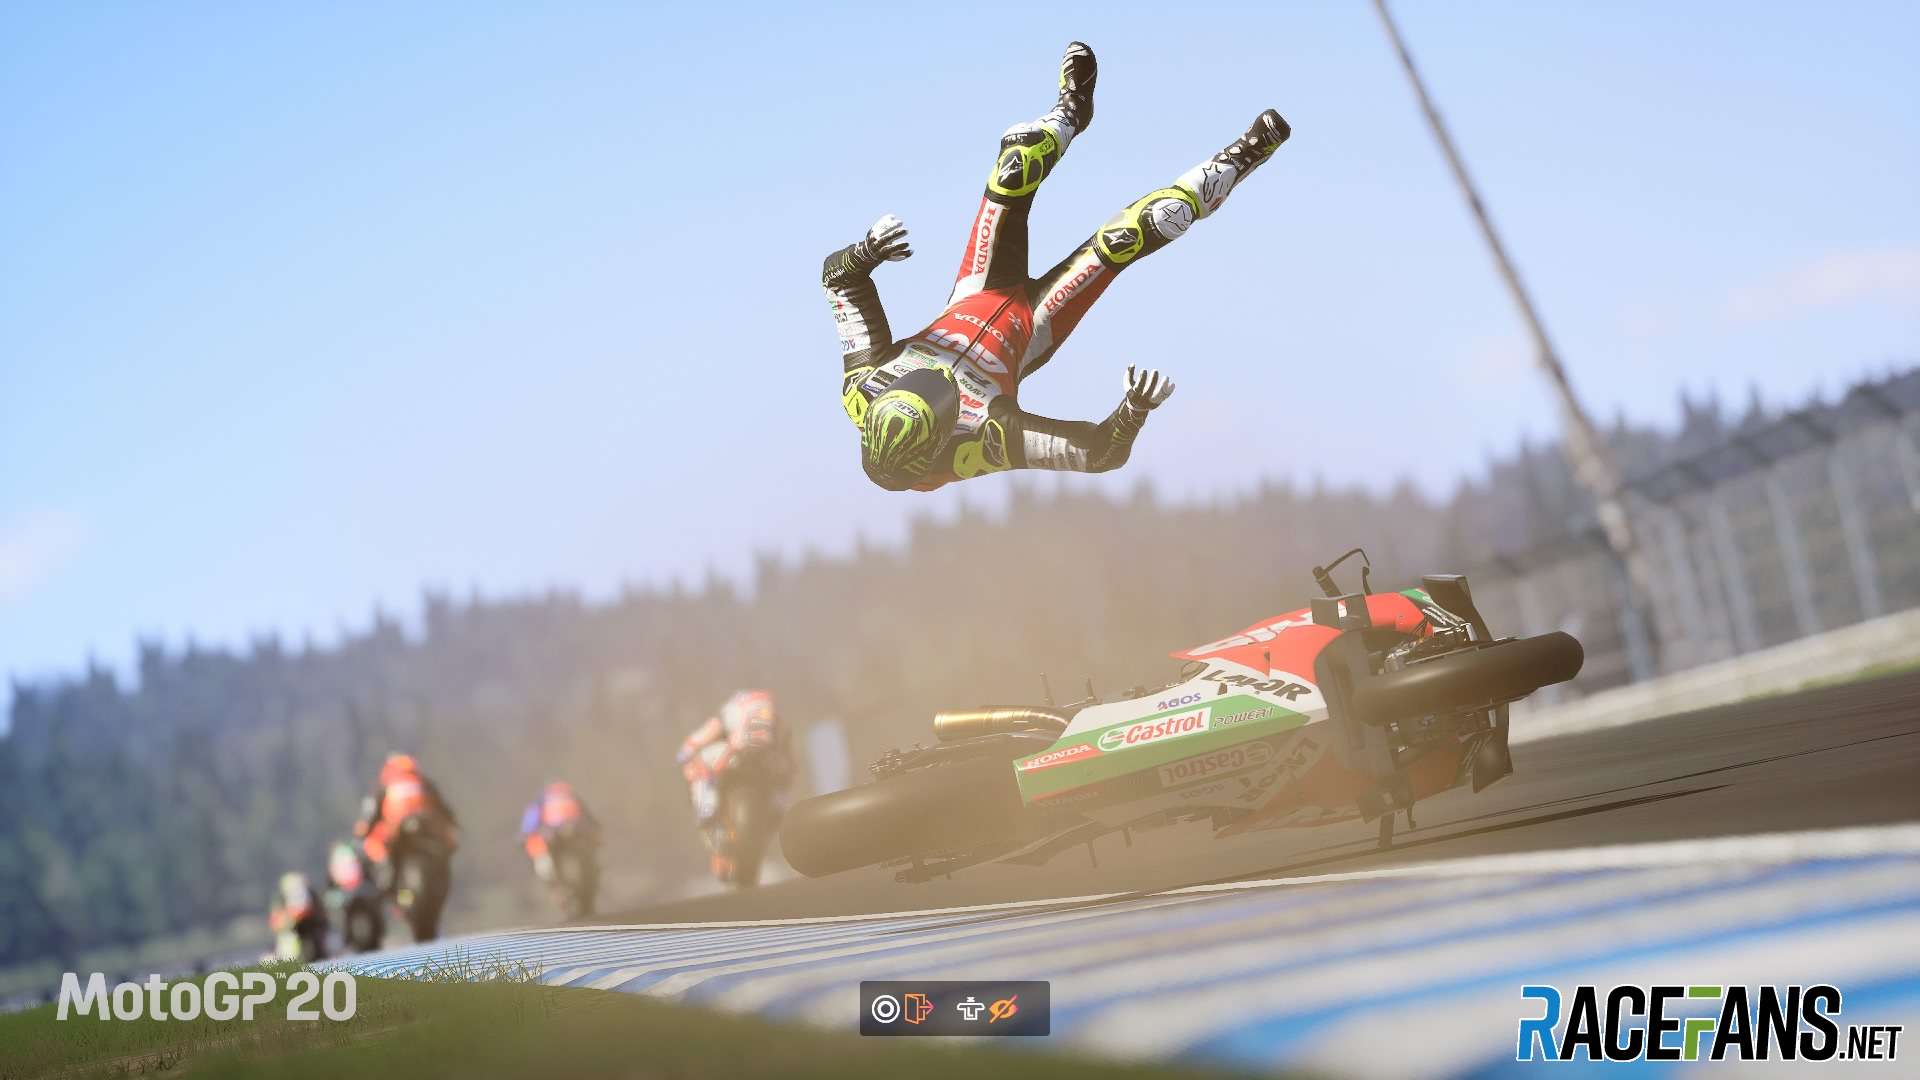 Moto GP 20 - The official Moto game RaceFans